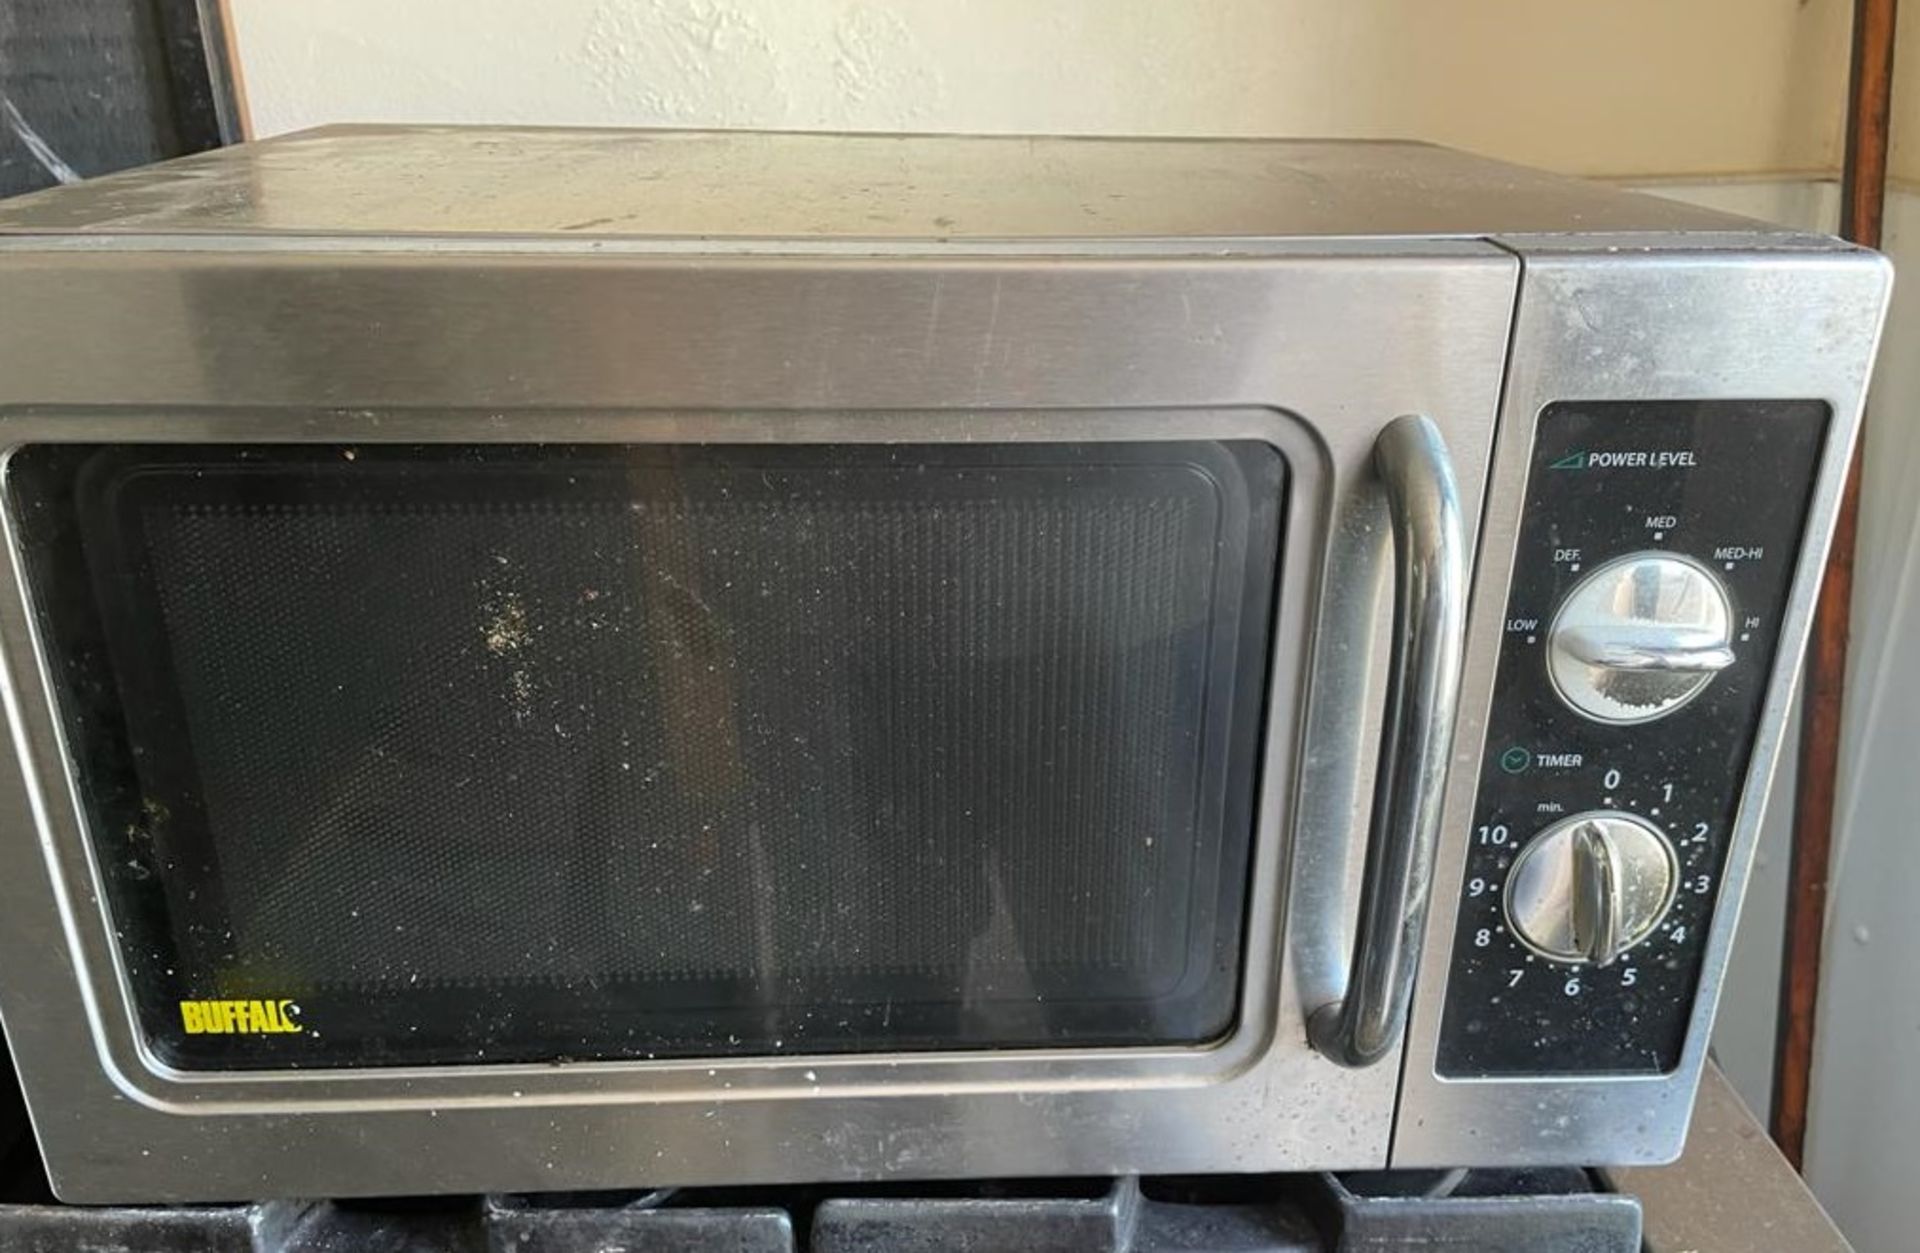 1 x Buffalo Commercial Microwave Oven - CL667 - Location: Brighton, Sussex, BN26Collections:This